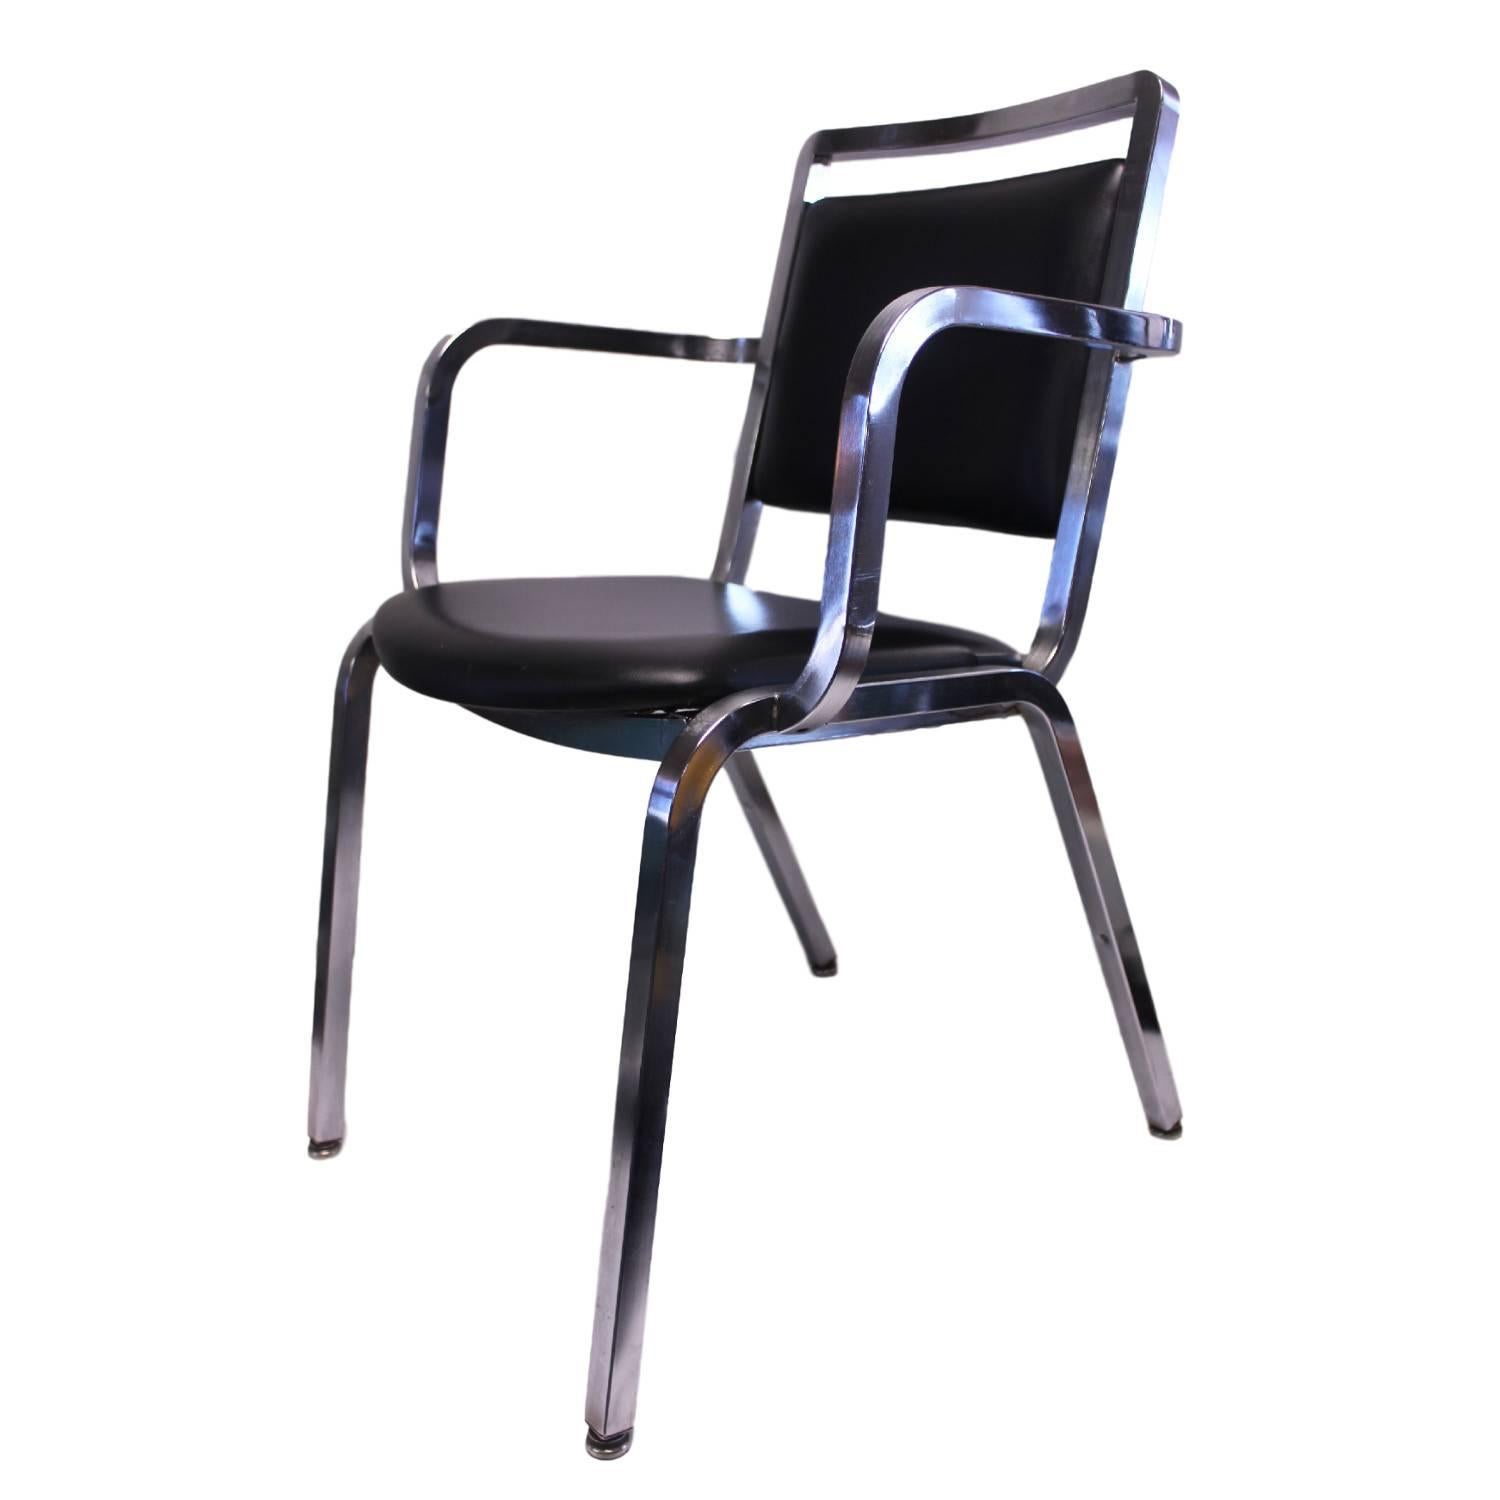 This fantastic set of chairs features beautiful Mid-Century design that seems like a blend of Sottsass's Nine-0 and the 1006 Navy chair. This set is also unusual as it features a welded steel frame with brushed chrome finish as opposed to the